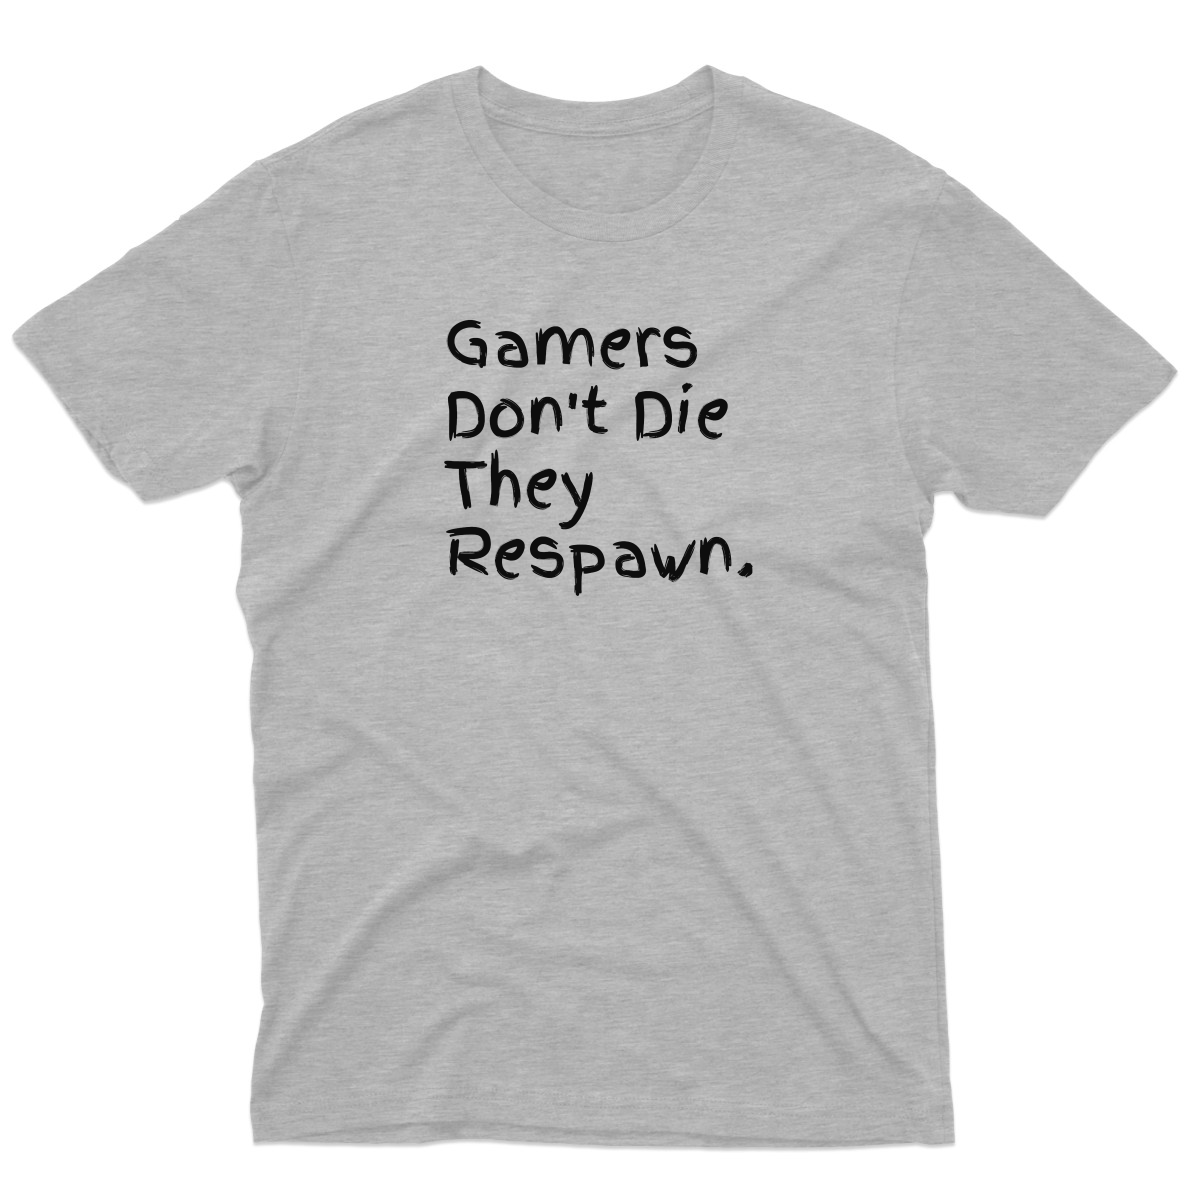 Gamers Don't Die They Respawn Men's T-shirt | Gray